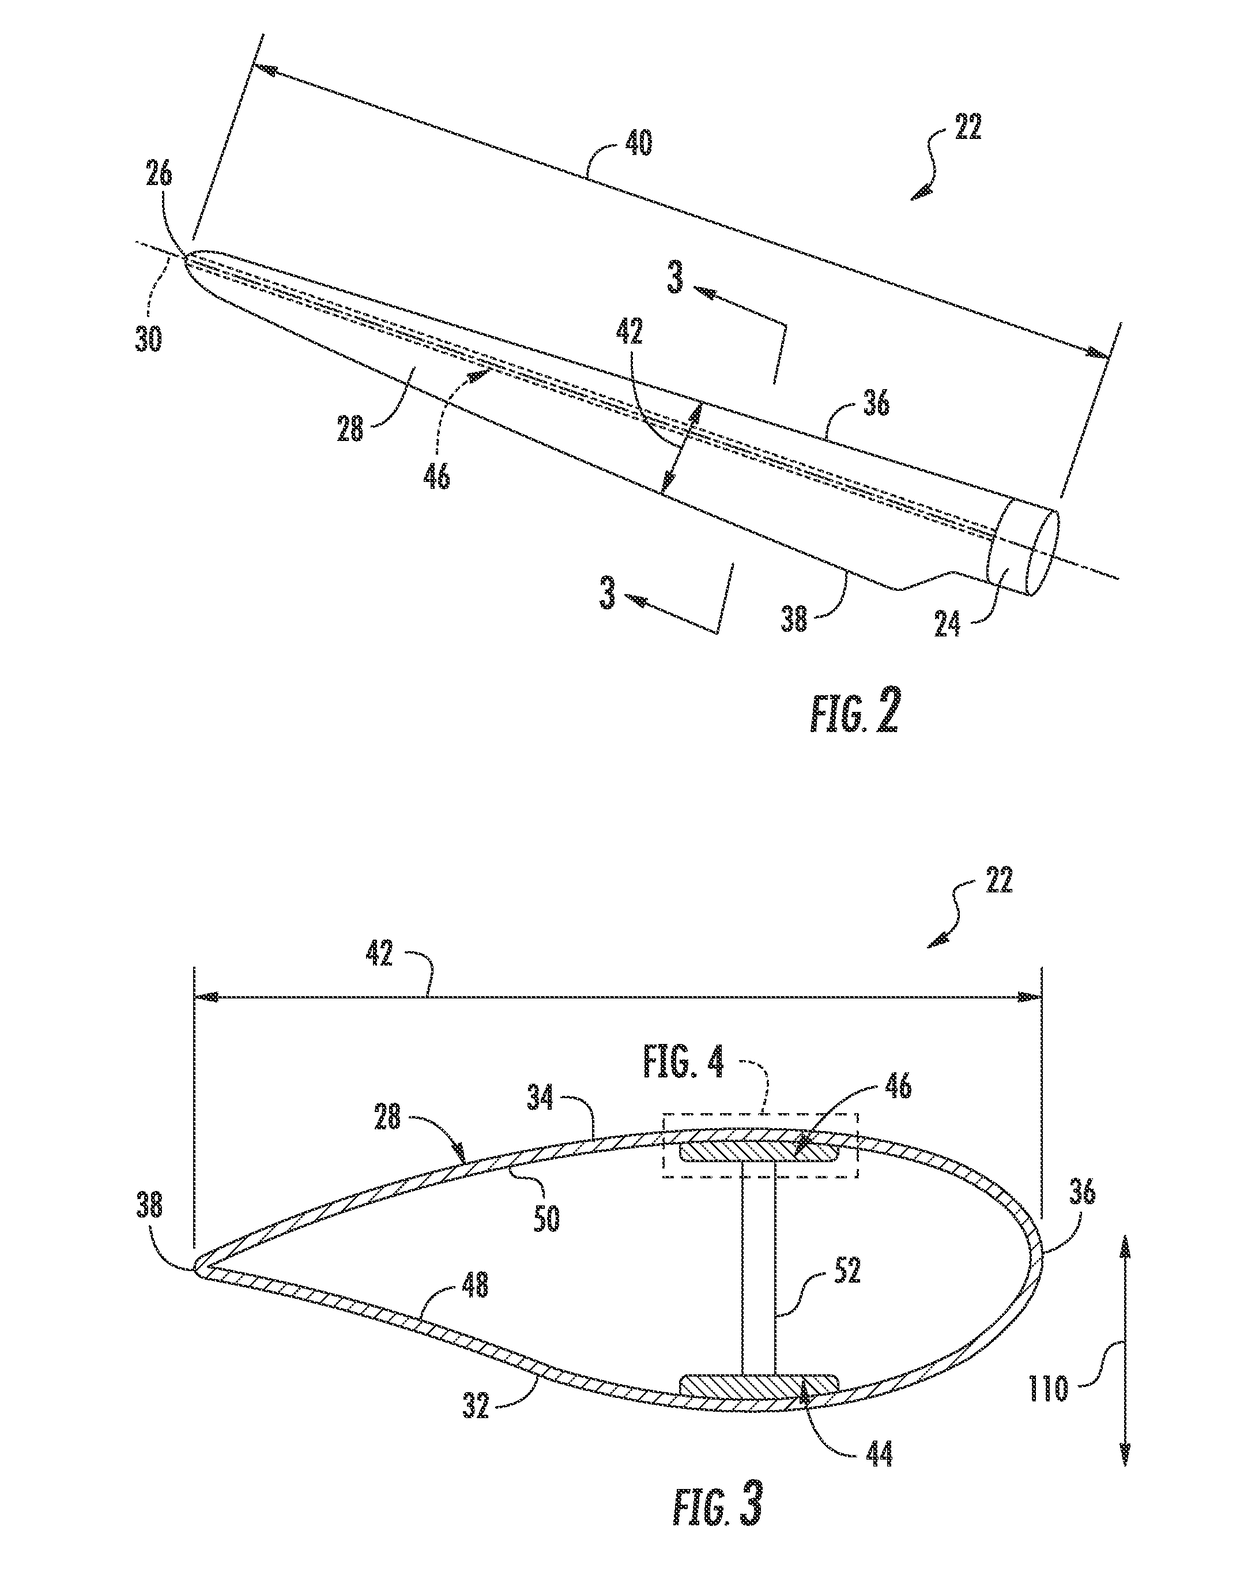 Wind turbine rotor blade components formed from pultruded hybrid-resin fiber-reinforced composites